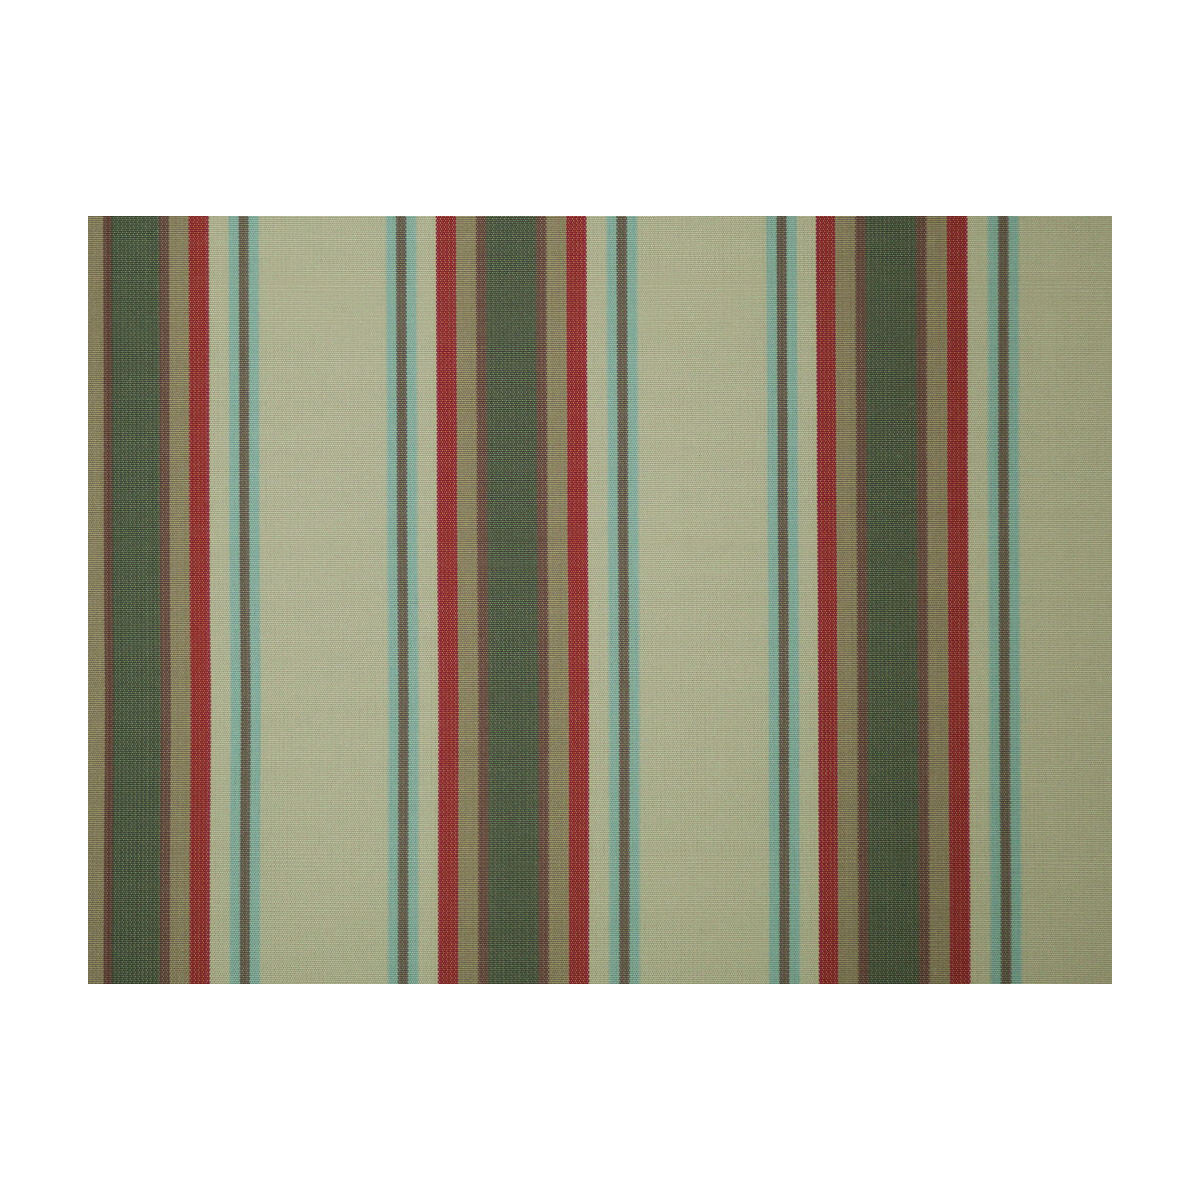 General Stripe fabric in olive color - pattern JAG-50030.3019.0 - by Brunschwig &amp; Fils in the Jagtar collection